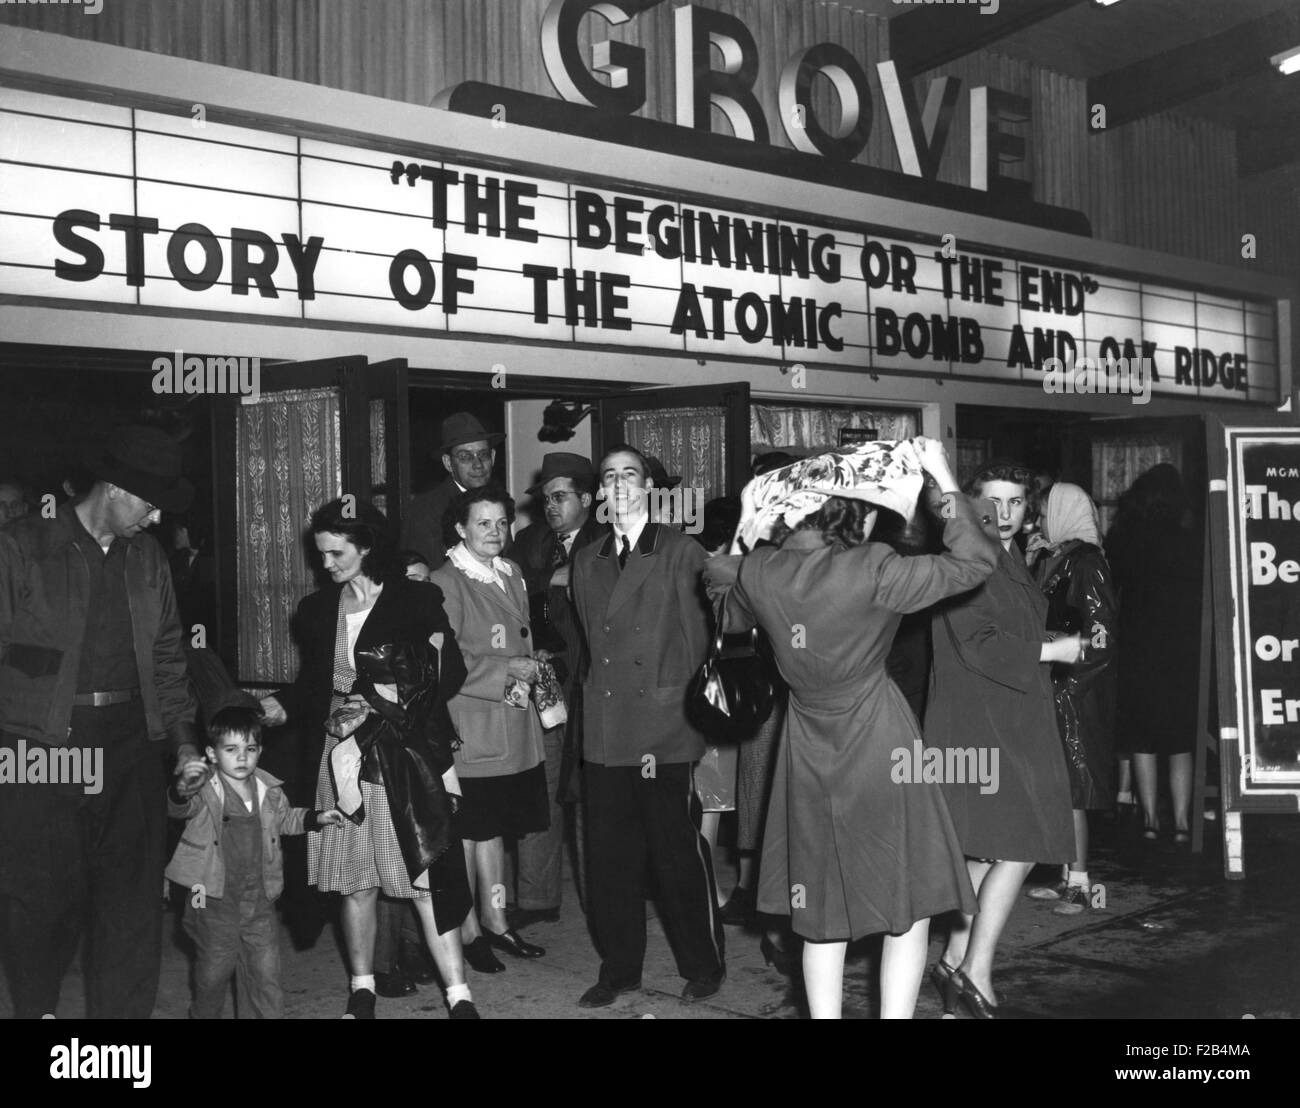 Movie theater marque announcing a movie, 'The Beginning or the End. Story of the Atomic Bomb and Oak Ridge'. After the bombing of Hiroshima and Nagasaki, the population of Oak Ridge Tennessee learned the reason for Top Secret activity in their Wartime city. 1945. - (BSLOC 2015 1 199) Stock Photo